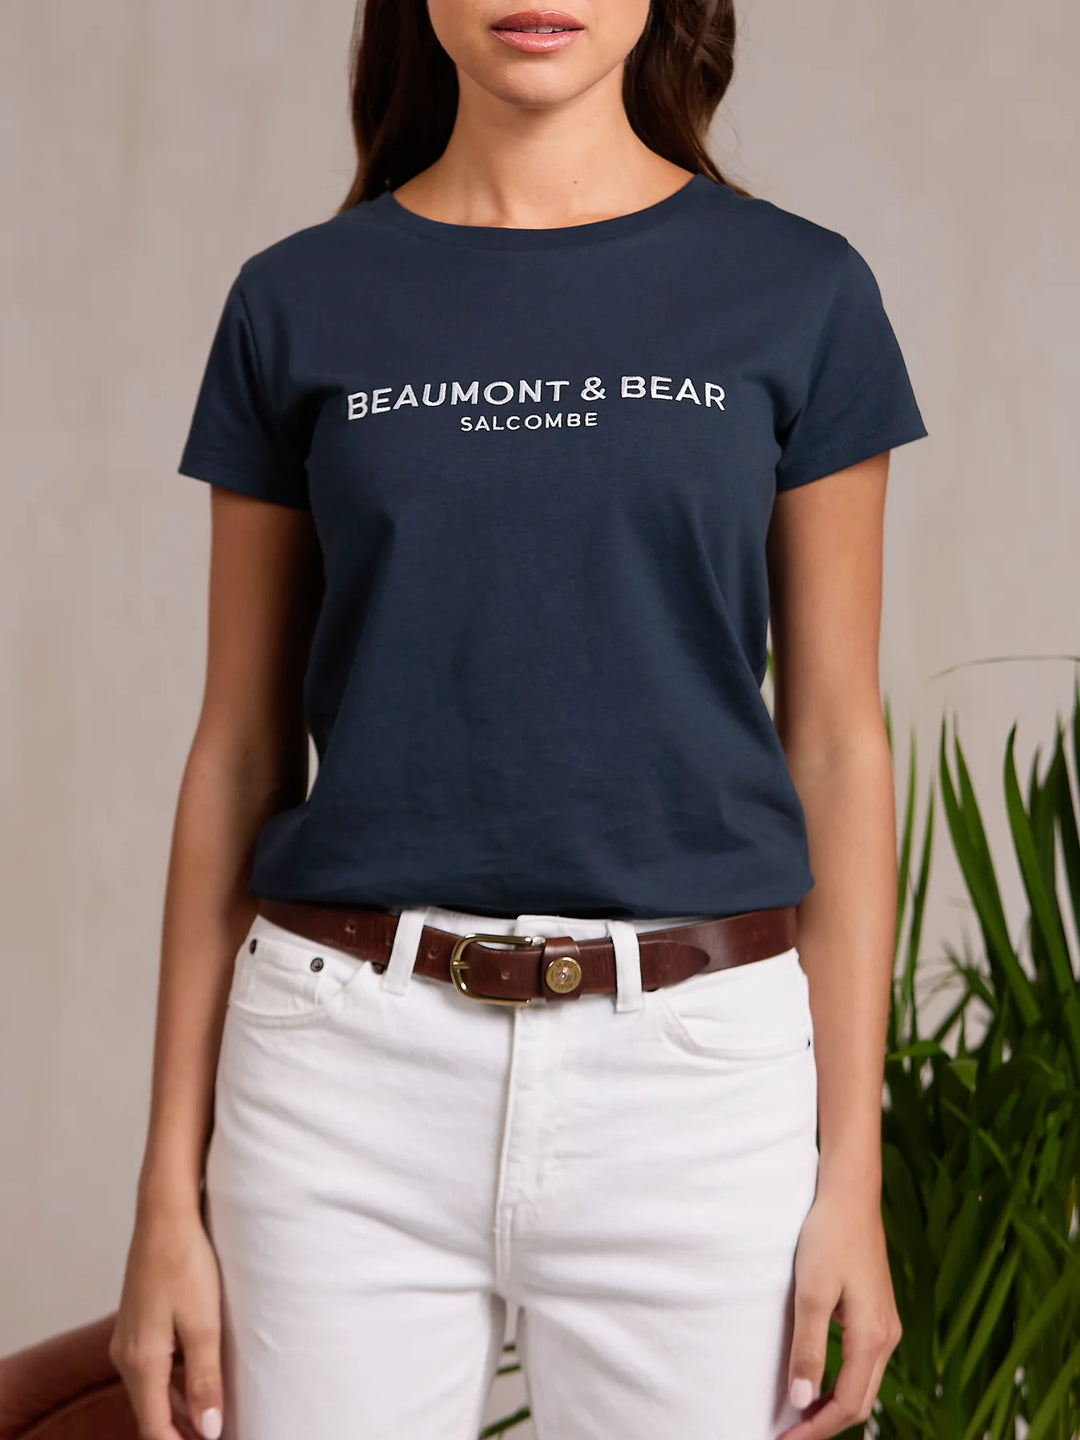 Beaumont & Bear Ladies Bolberry T-Shirt